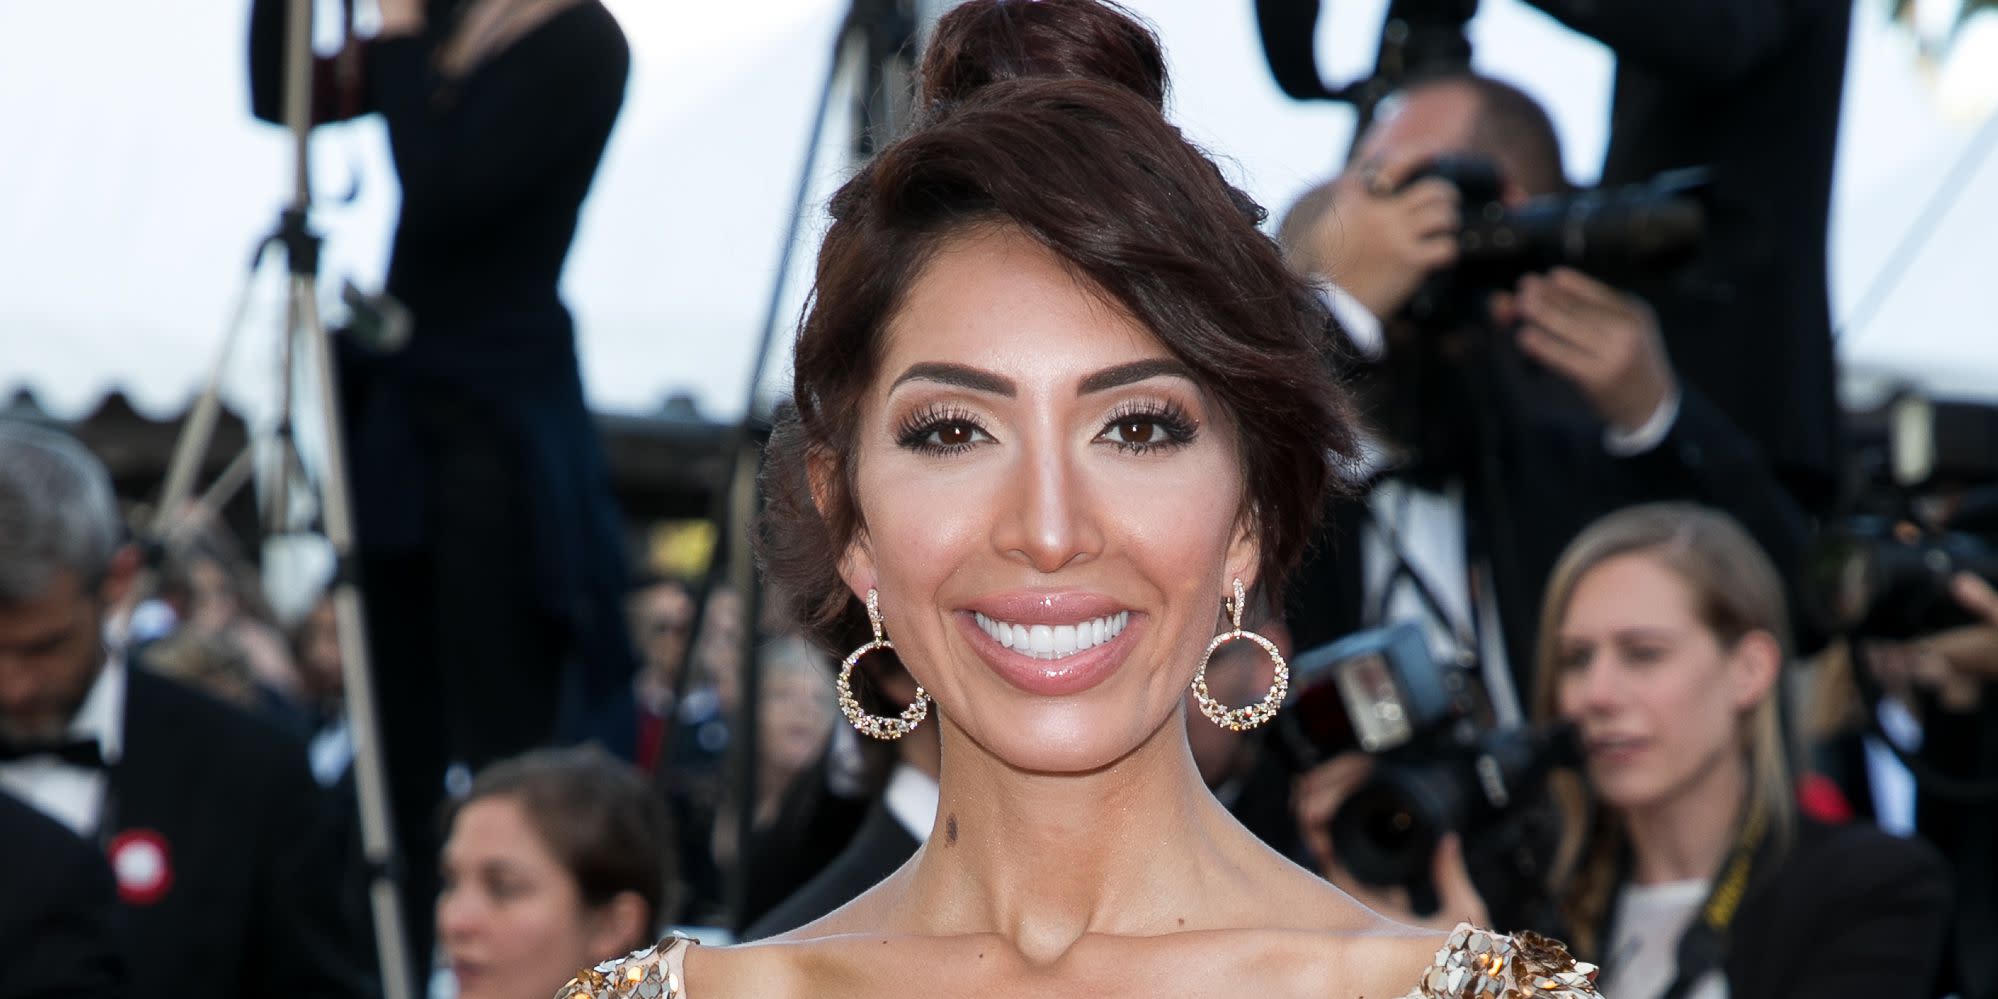 Farrah Abraham Opens Up About Flashing At Cannes